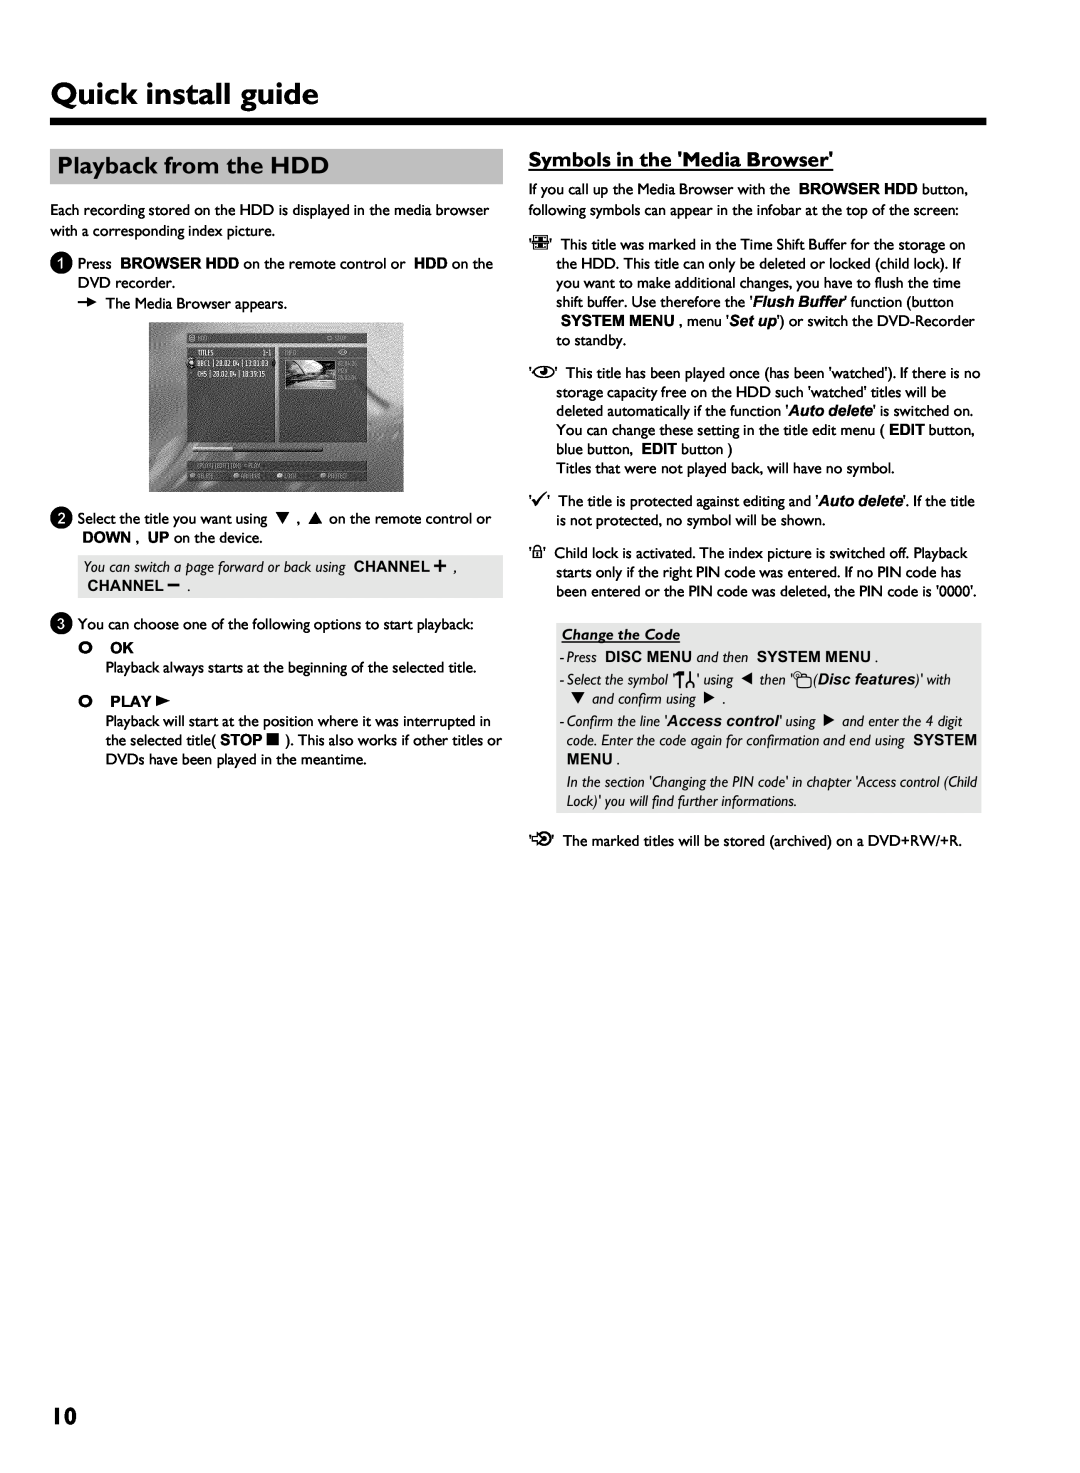 Philips HDRW720/69 user manual Playback from the HDD, Symbols in the Media Browser, Quick install guide, O Ok, O Play G 